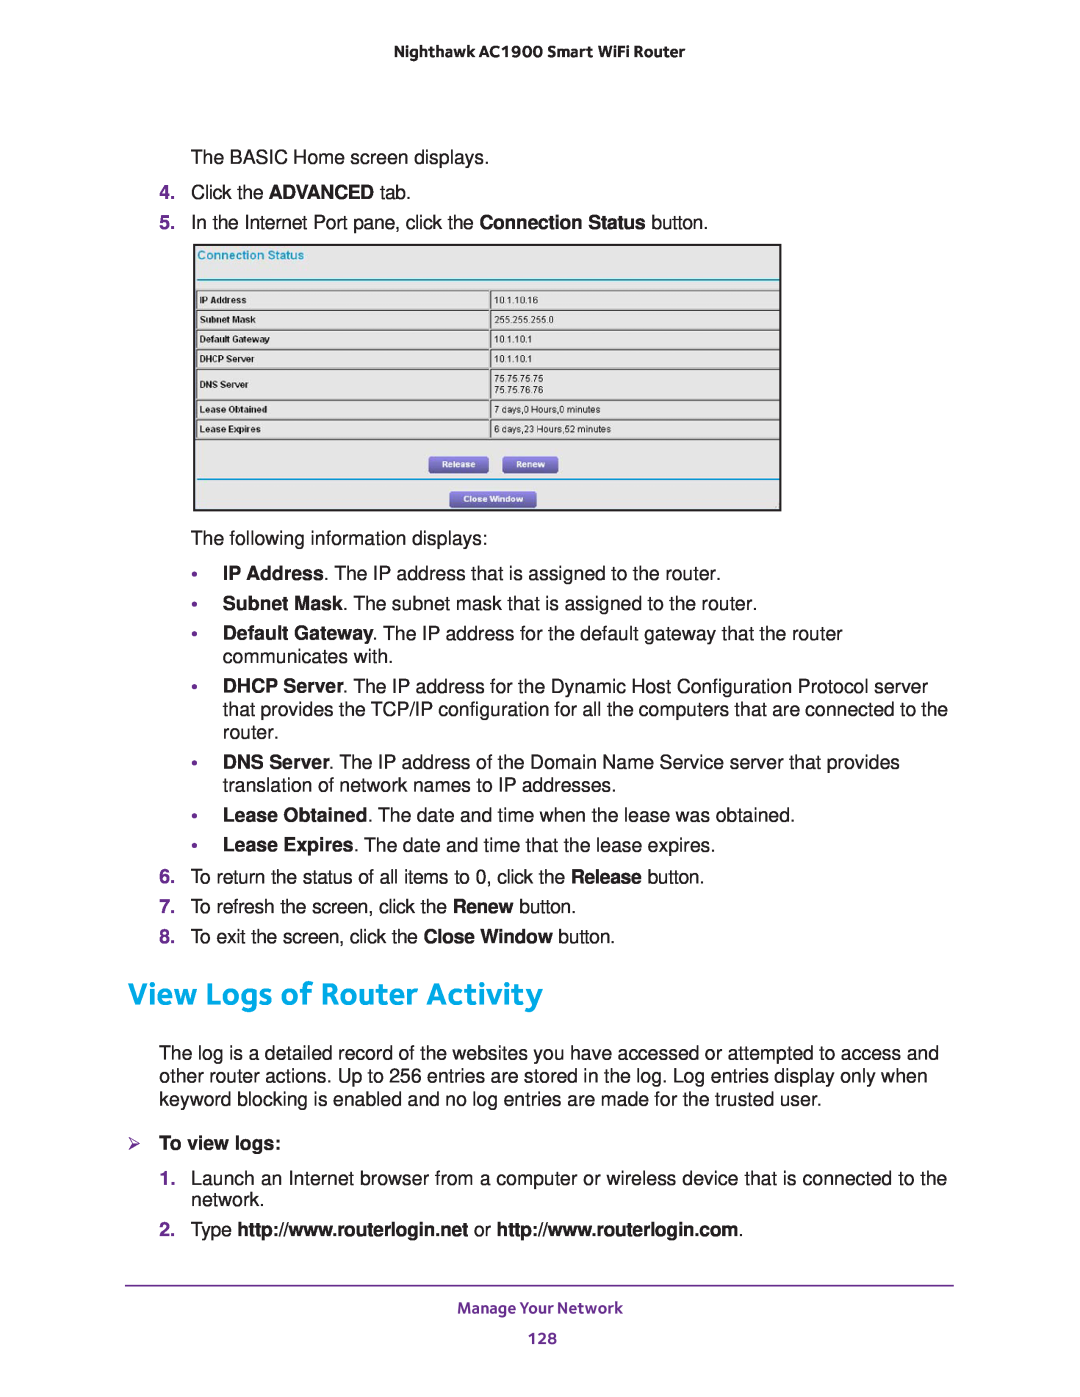 NETGEAR Model R7000 user manual View Logs of Router Activity,  To view logs 